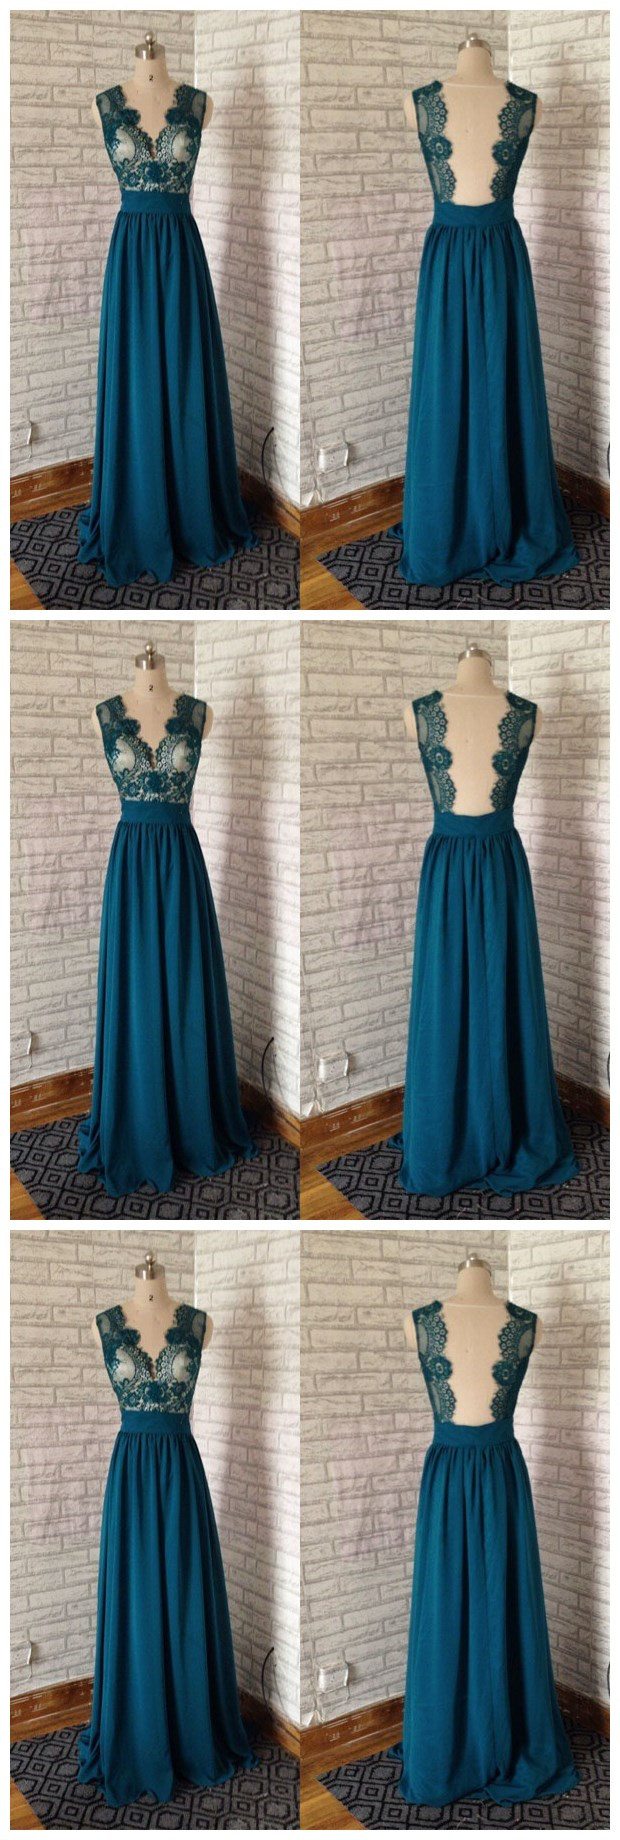 Green Lace Applique Sleeveless Prom Dress